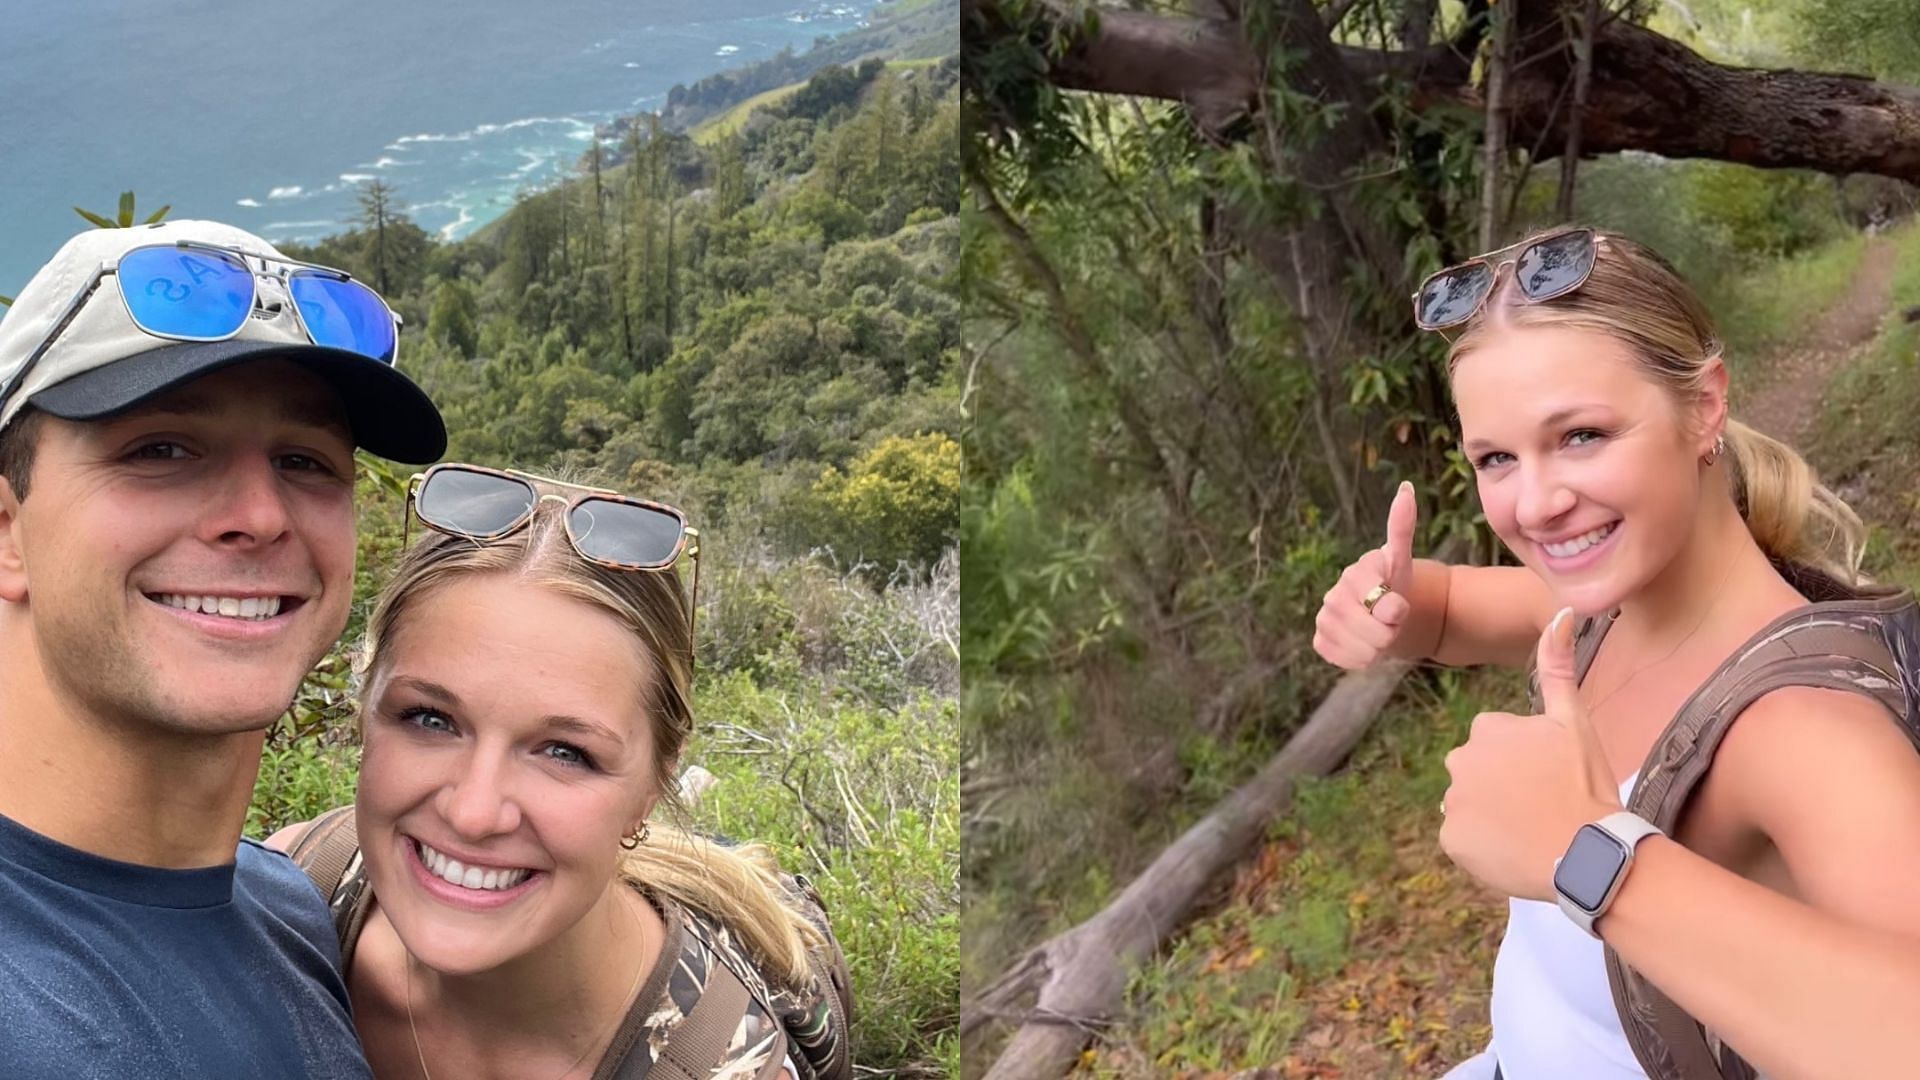 Brock and Jenna Purdy took selfies from their recent Big Sur, California trip.